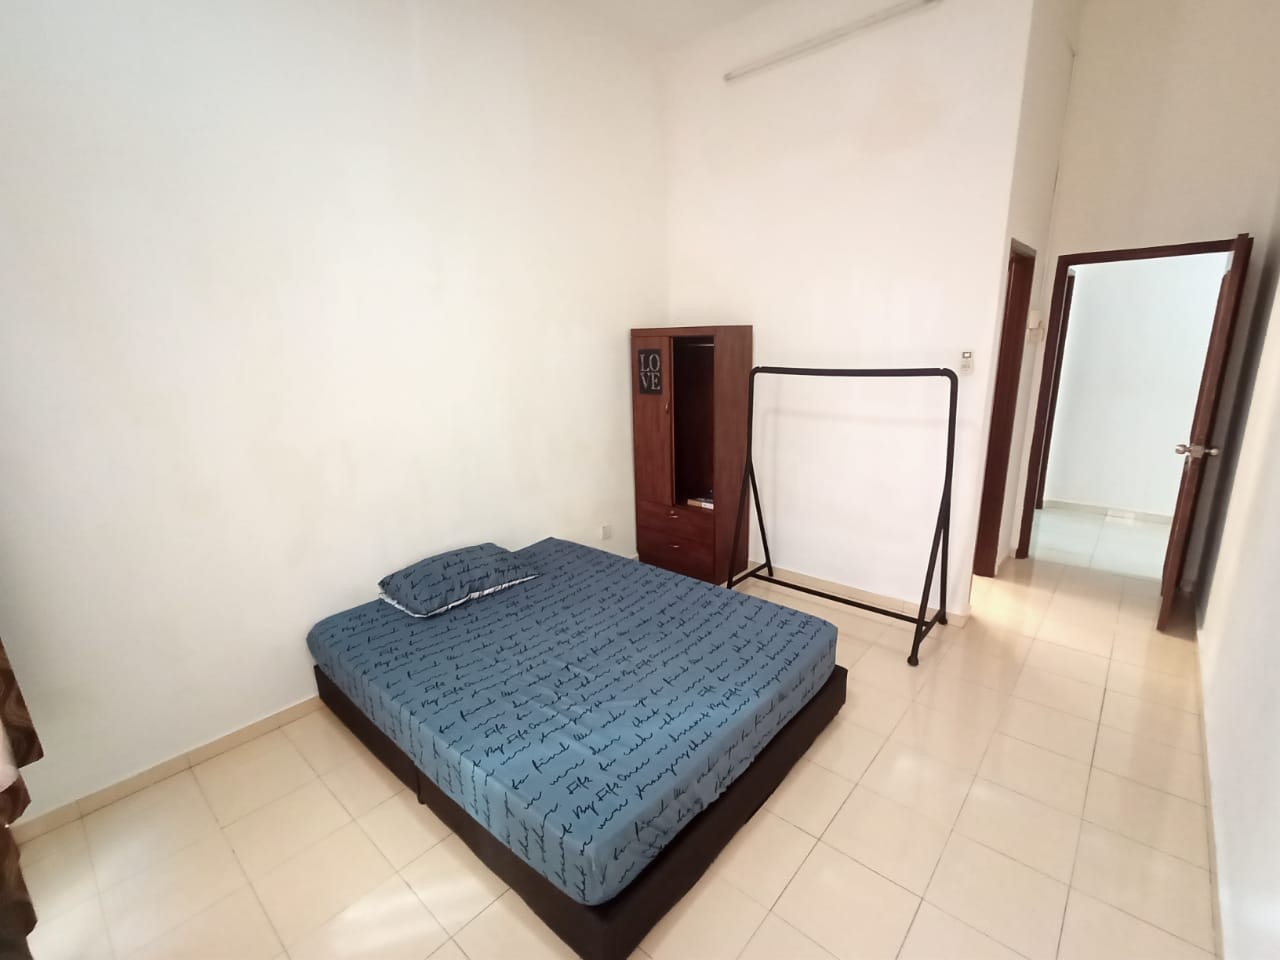 University Green Apartment Bukit Beruang, 24hr Security Move In Condition, MMU Melaka For Rent RM1,050 (CHAN 0105280170)